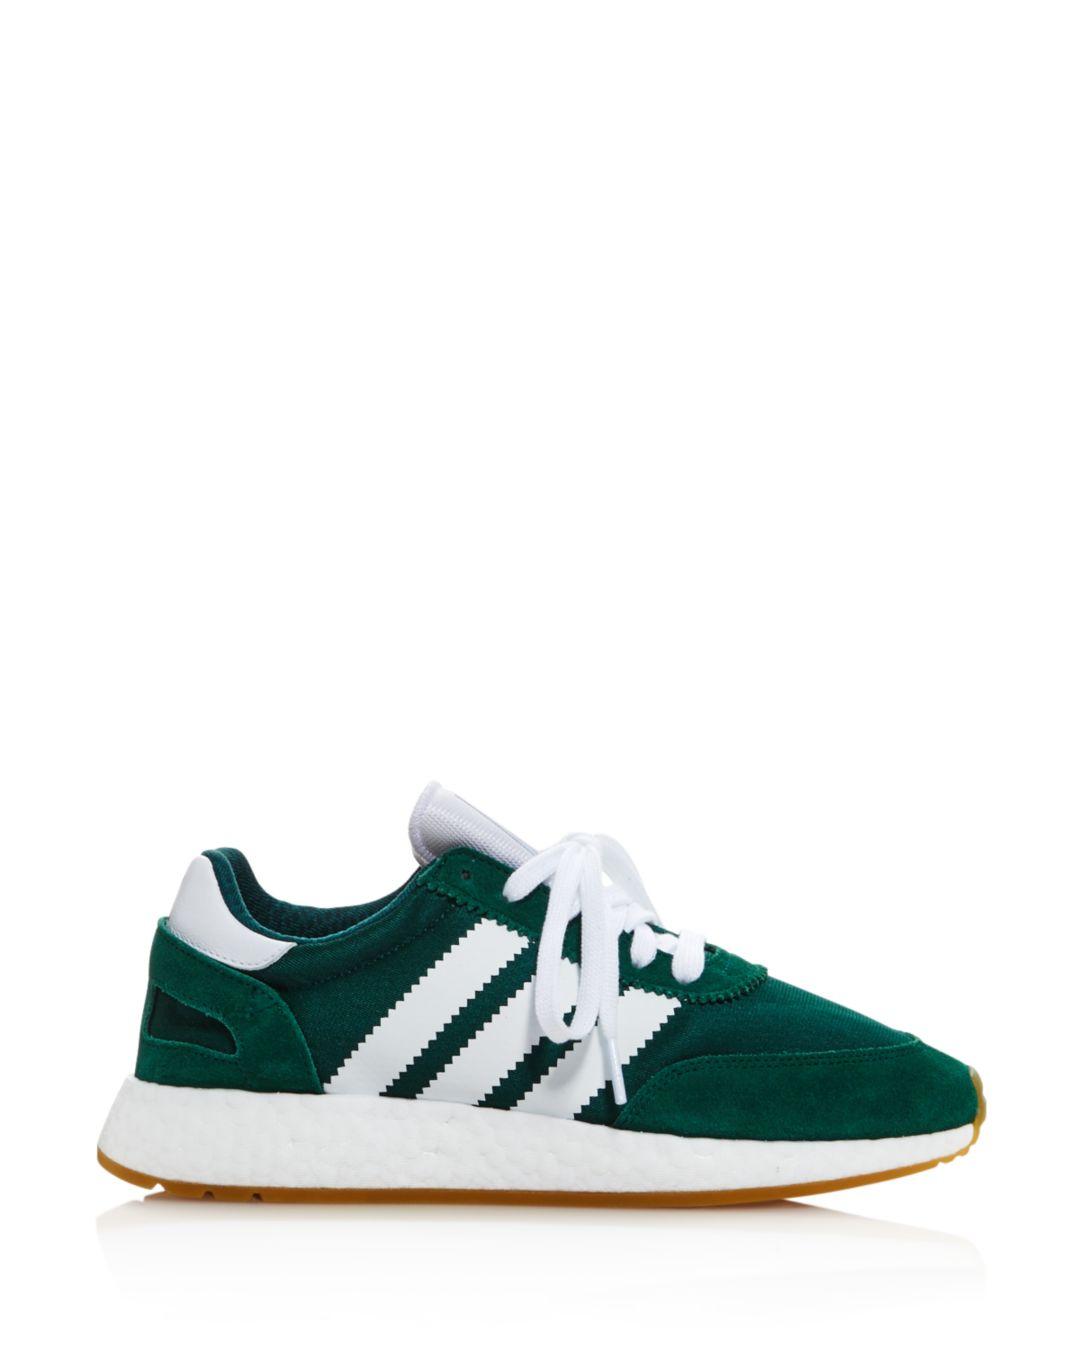 Psicologicamente Lógicamente acortar adidas Women's I - 5923 Low - Top Sneakers in Green | Lyst